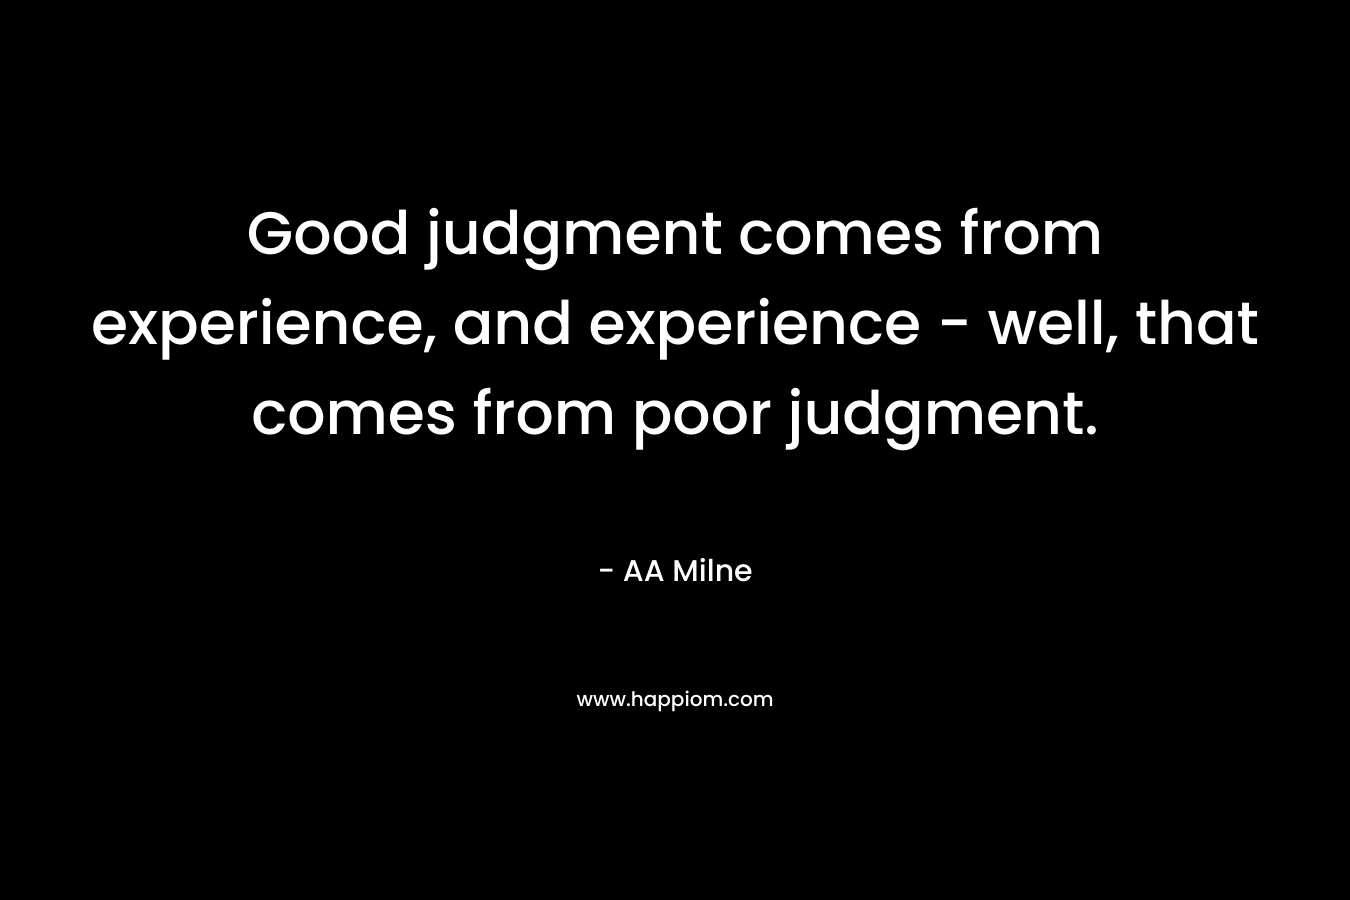 Good judgment comes from experience, and experience – well, that comes from poor judgment. – AA Milne